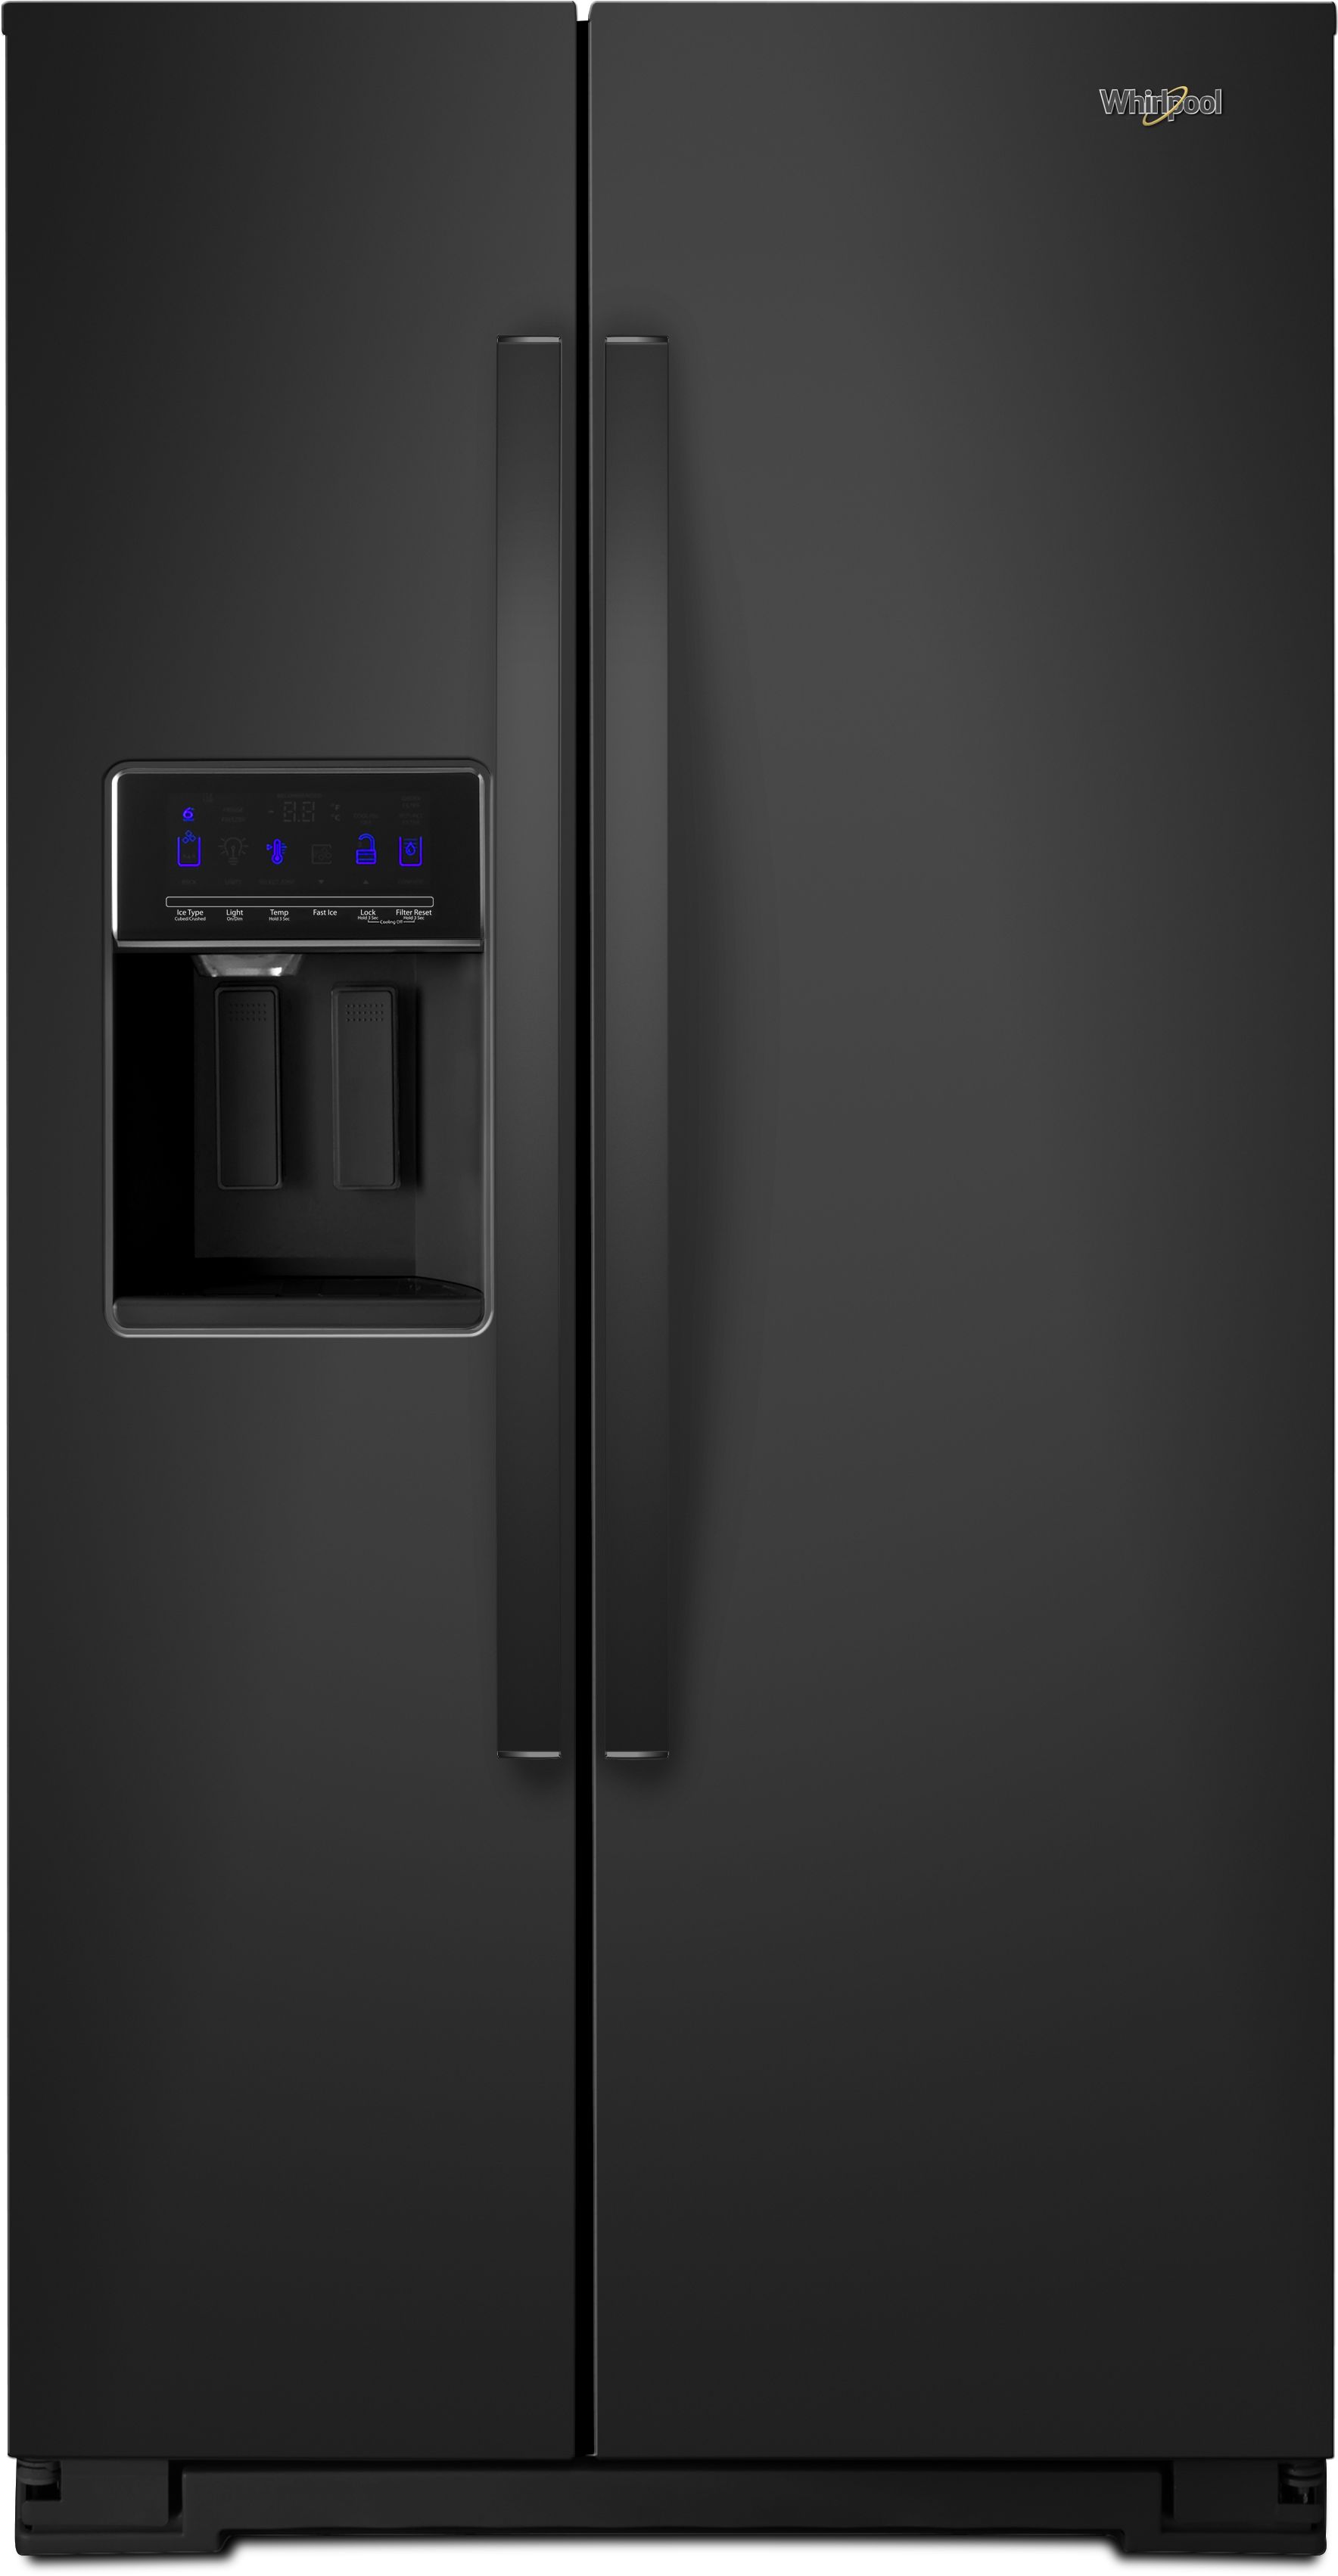 Whirlpool® 20.6 Cu. Ft. Black Counter Depth Side-By-Side Refrigerator